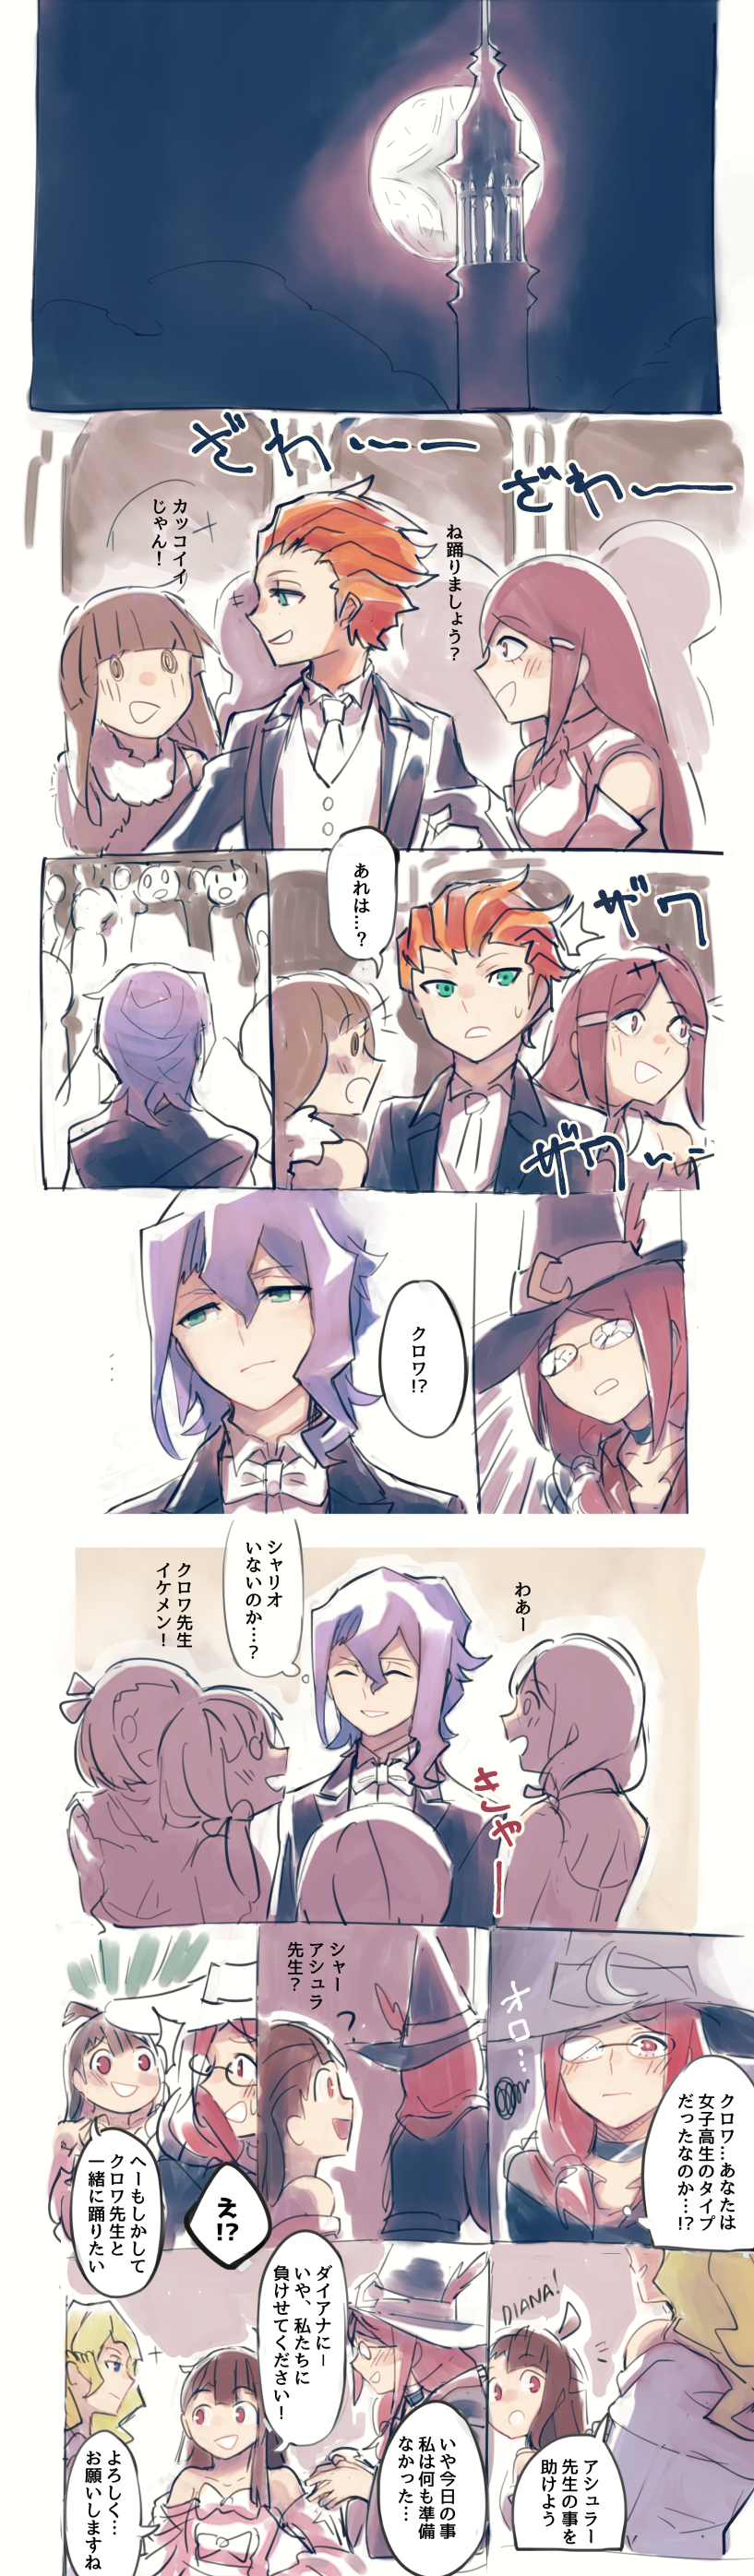 absurdres amanda_o'neill blonde_hair blue_eyes blush broken_glasses comic croix_meridies diana_cavendish dress embarrassed glasses green_eyes hat highres kagari_atsuko little_witch_academia long_hair moon ponytail purple_hair red_eyes redhead reverse_trap shiny_chariot translation_request tuxedo ursula_charistes vento witch witch_hat